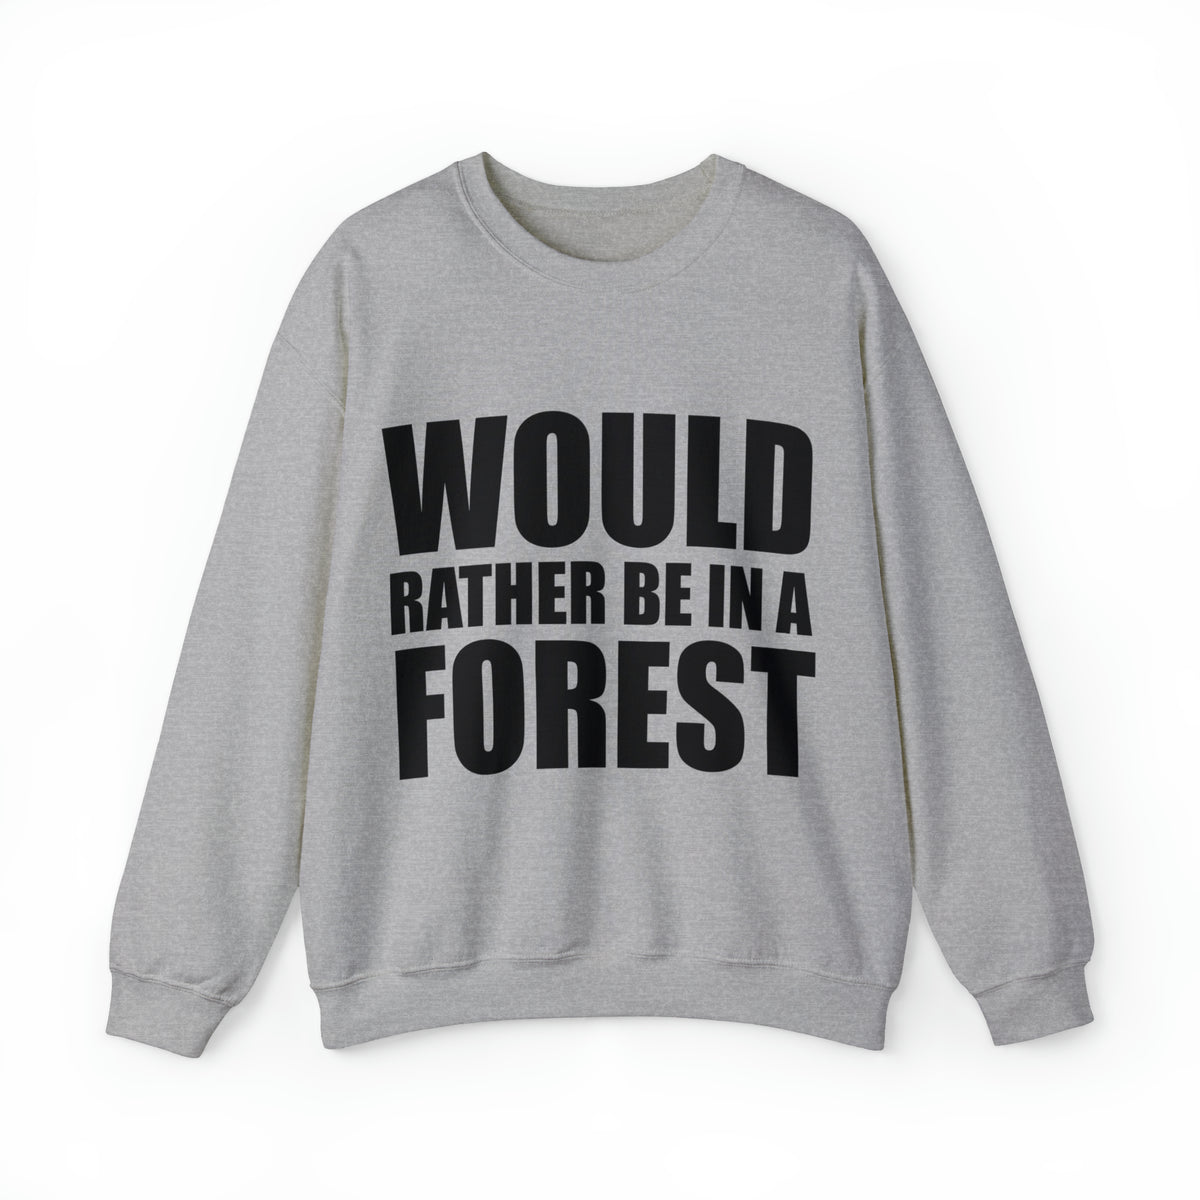 Would rather be in a forest